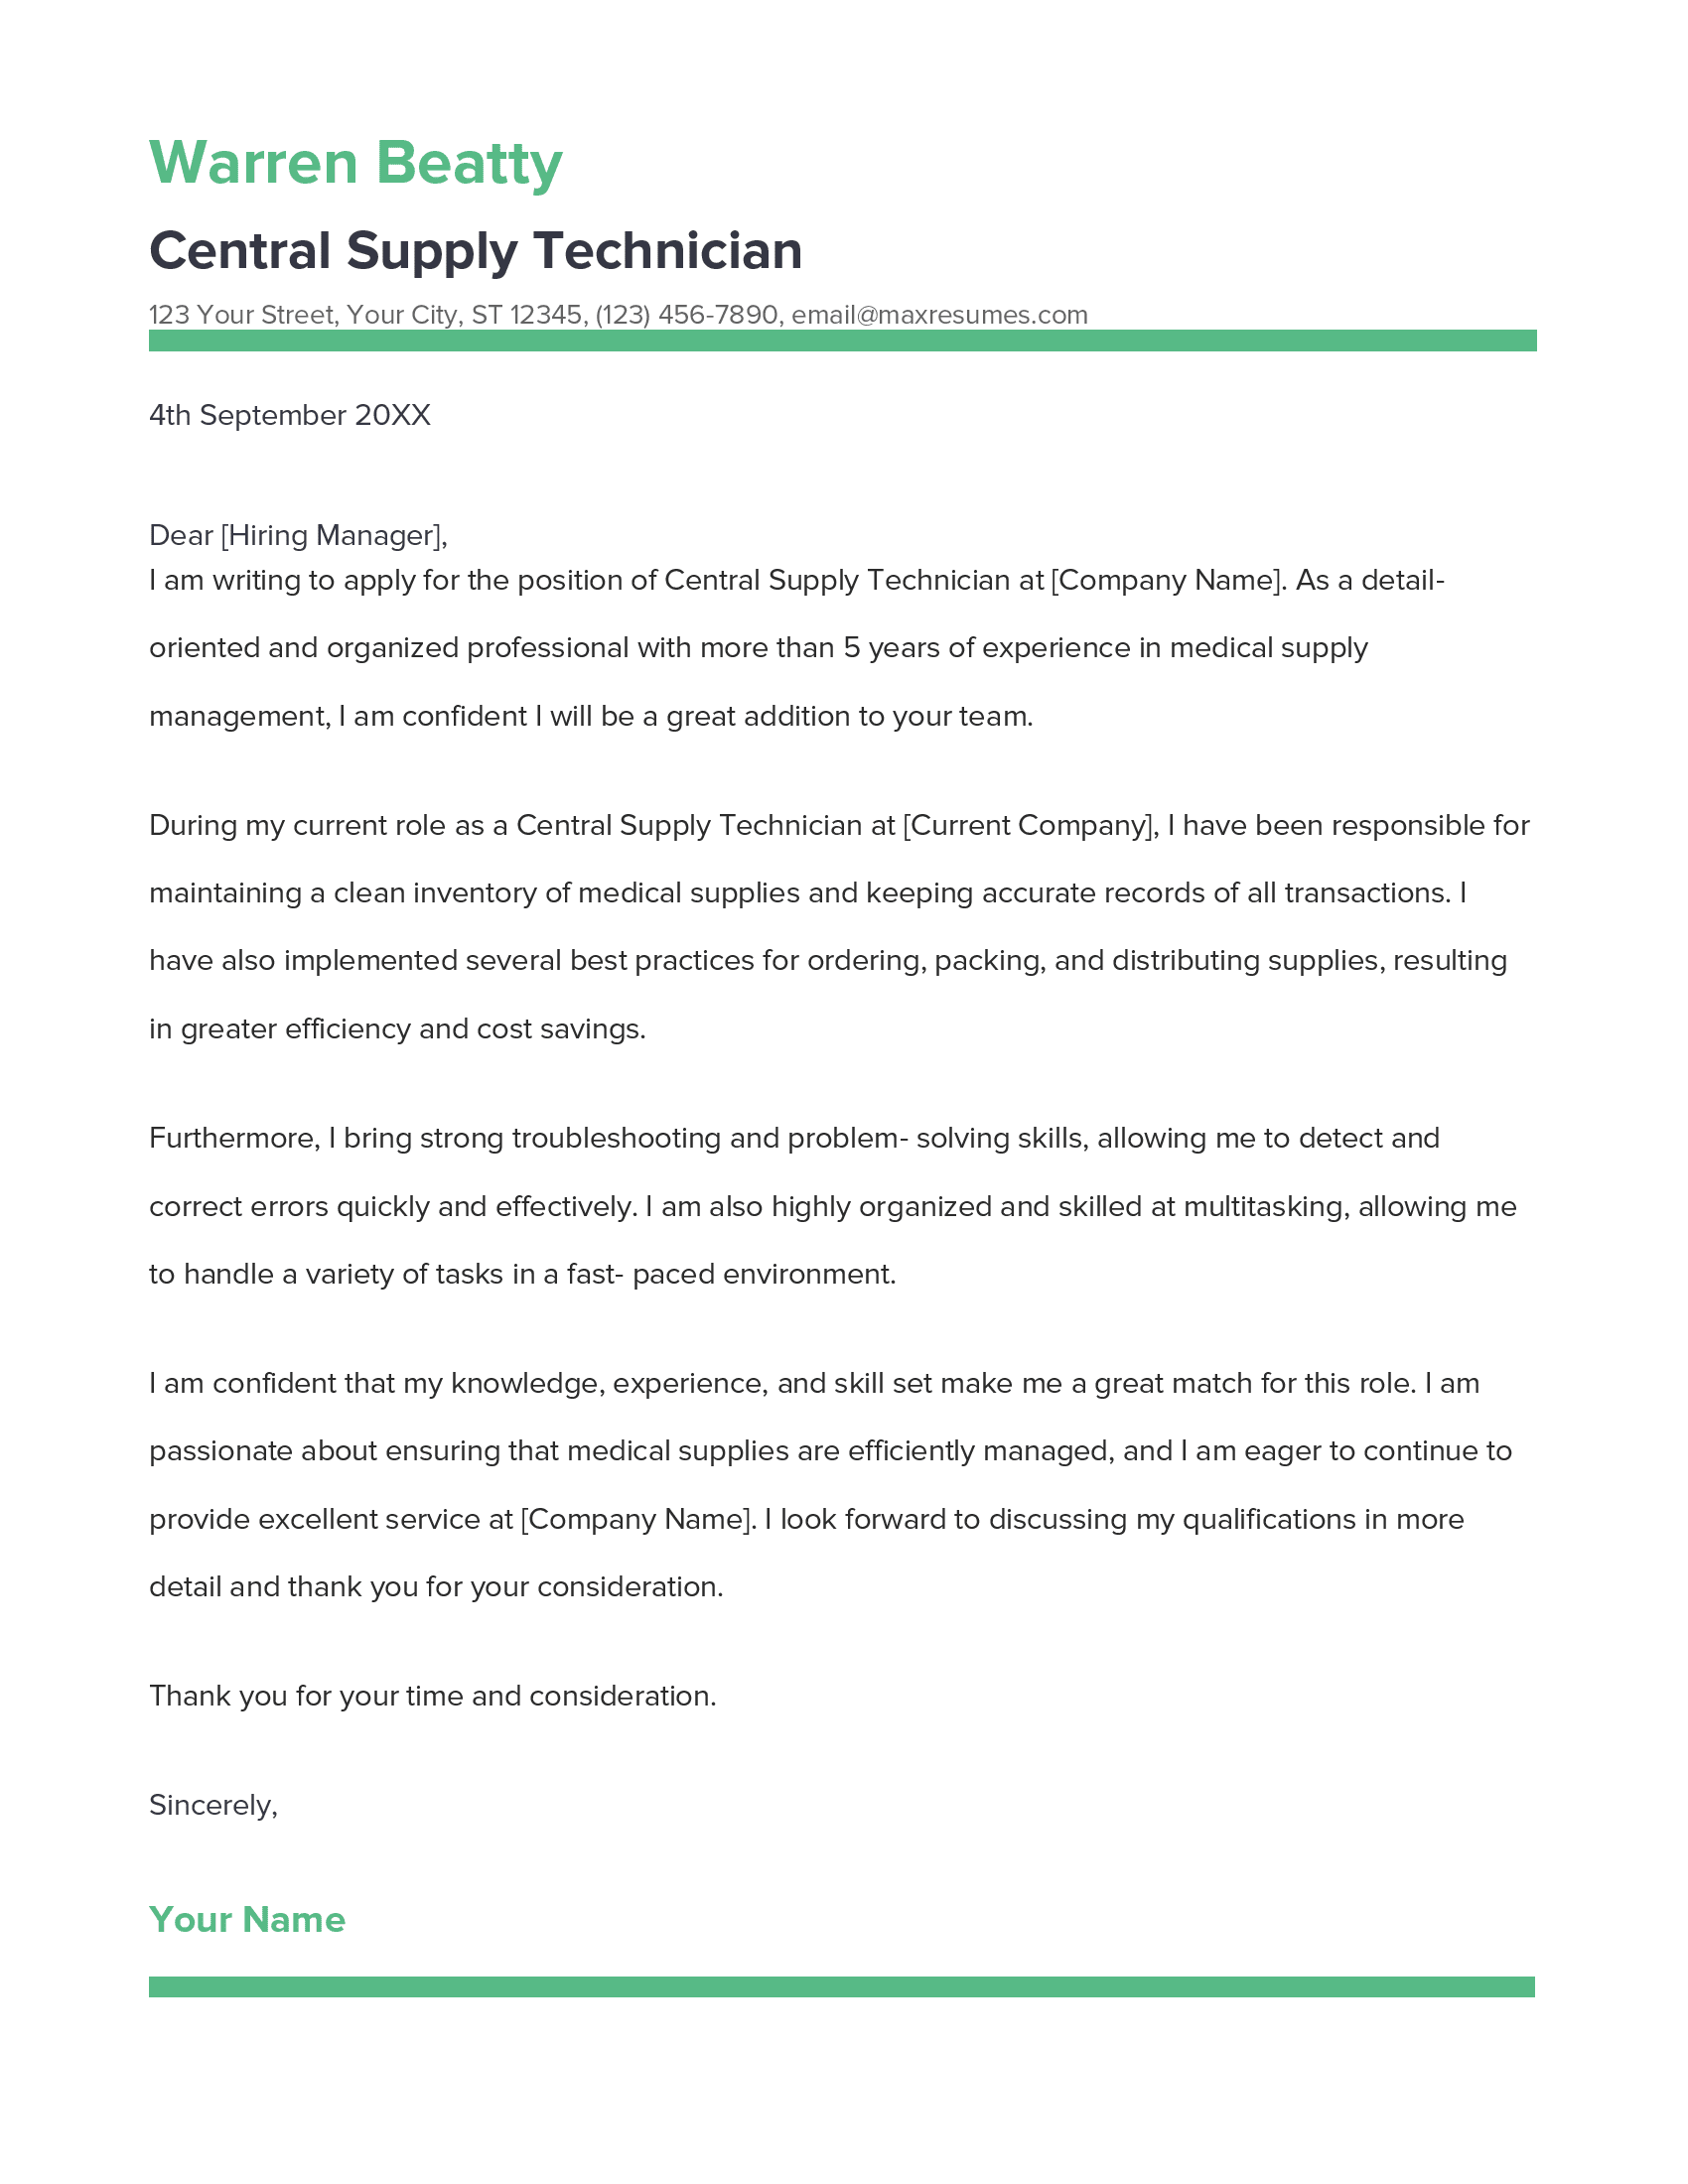 Central Supply Technician Cover Letter Example